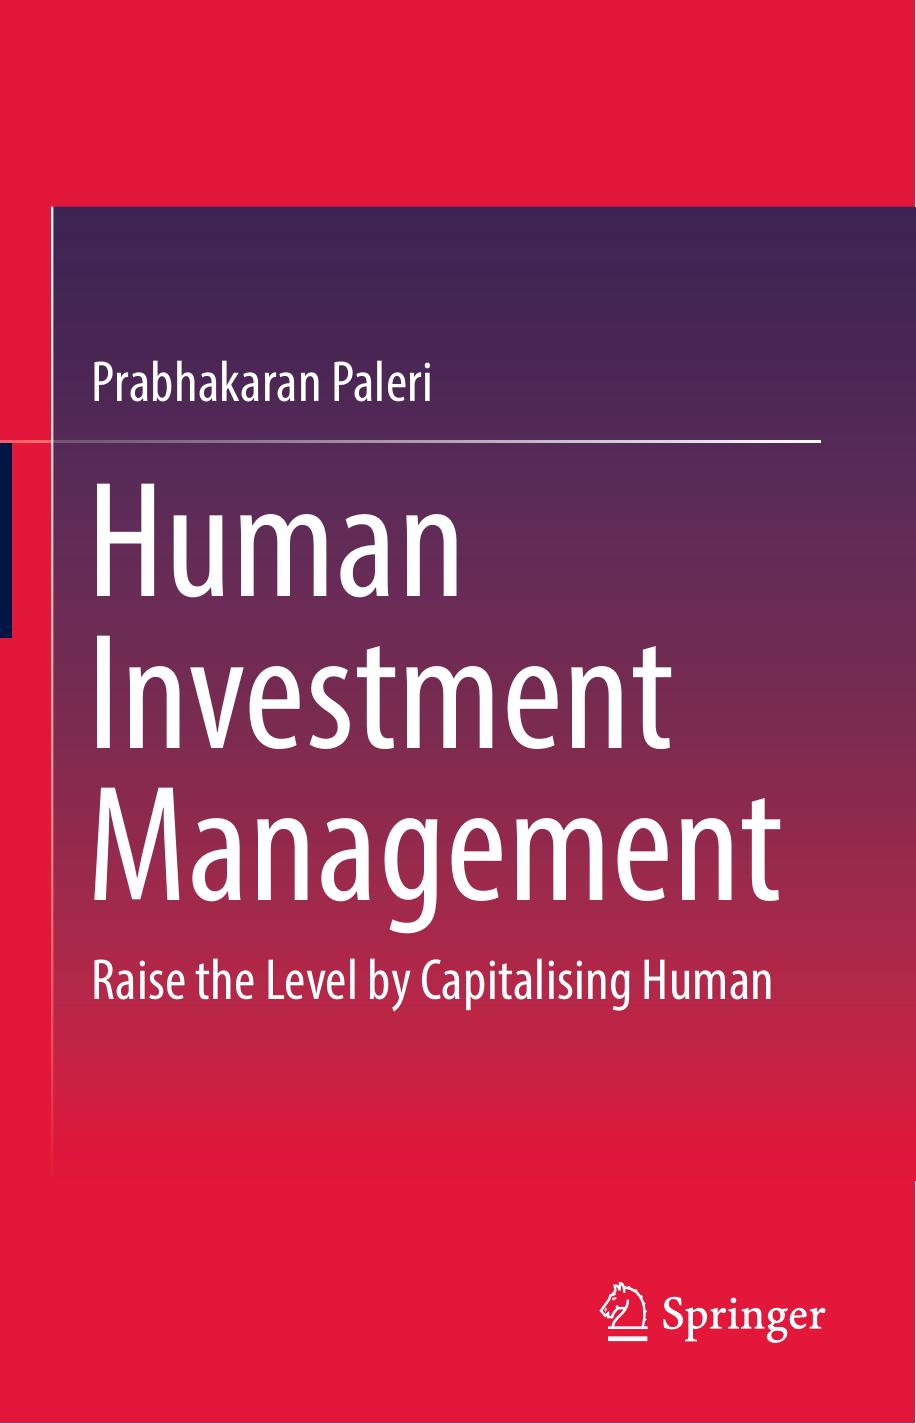 Human investment management raise the level by capitalising human 2018